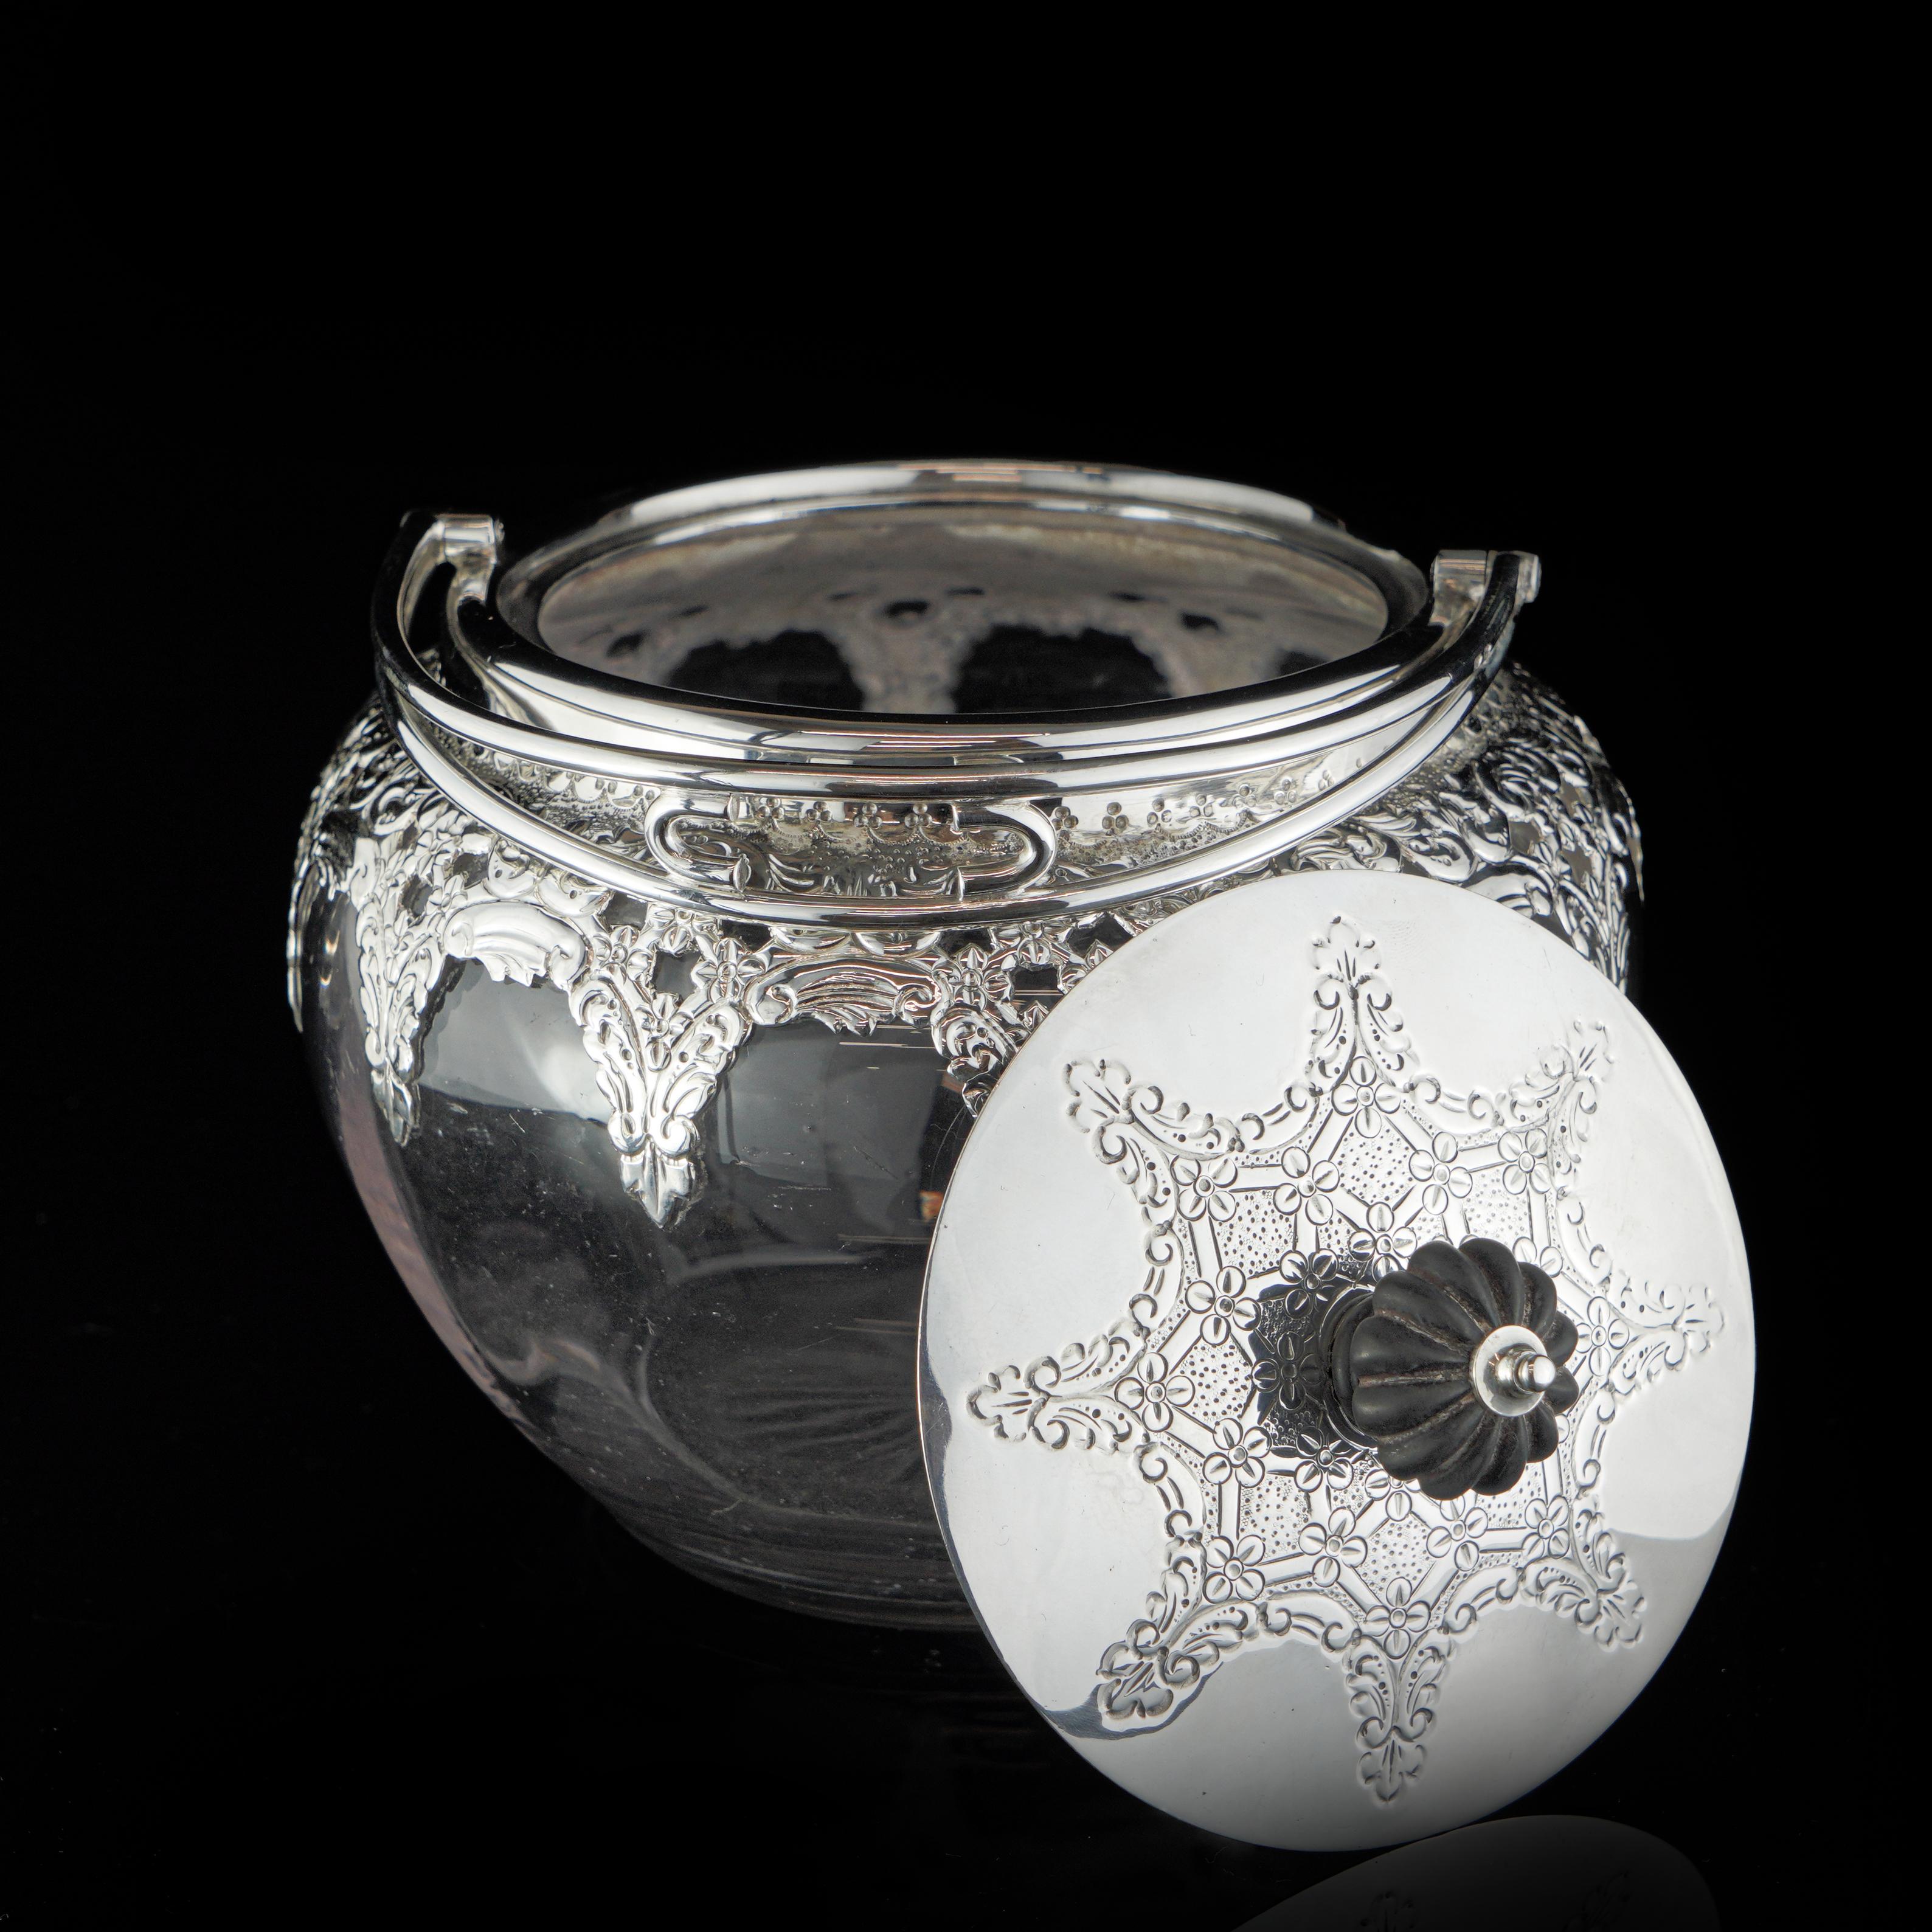 Antique 19th Century sterling silver and glass cookie jar/caddy with swing handle.
 Maker: Thomas Latham & Ernest Morton
 Made in England, Birmingham, 1896
 Fully hallmarked.

 Approx. Dimensions - 
 Diameter x height: 14 x 14 cm 
 Weight: